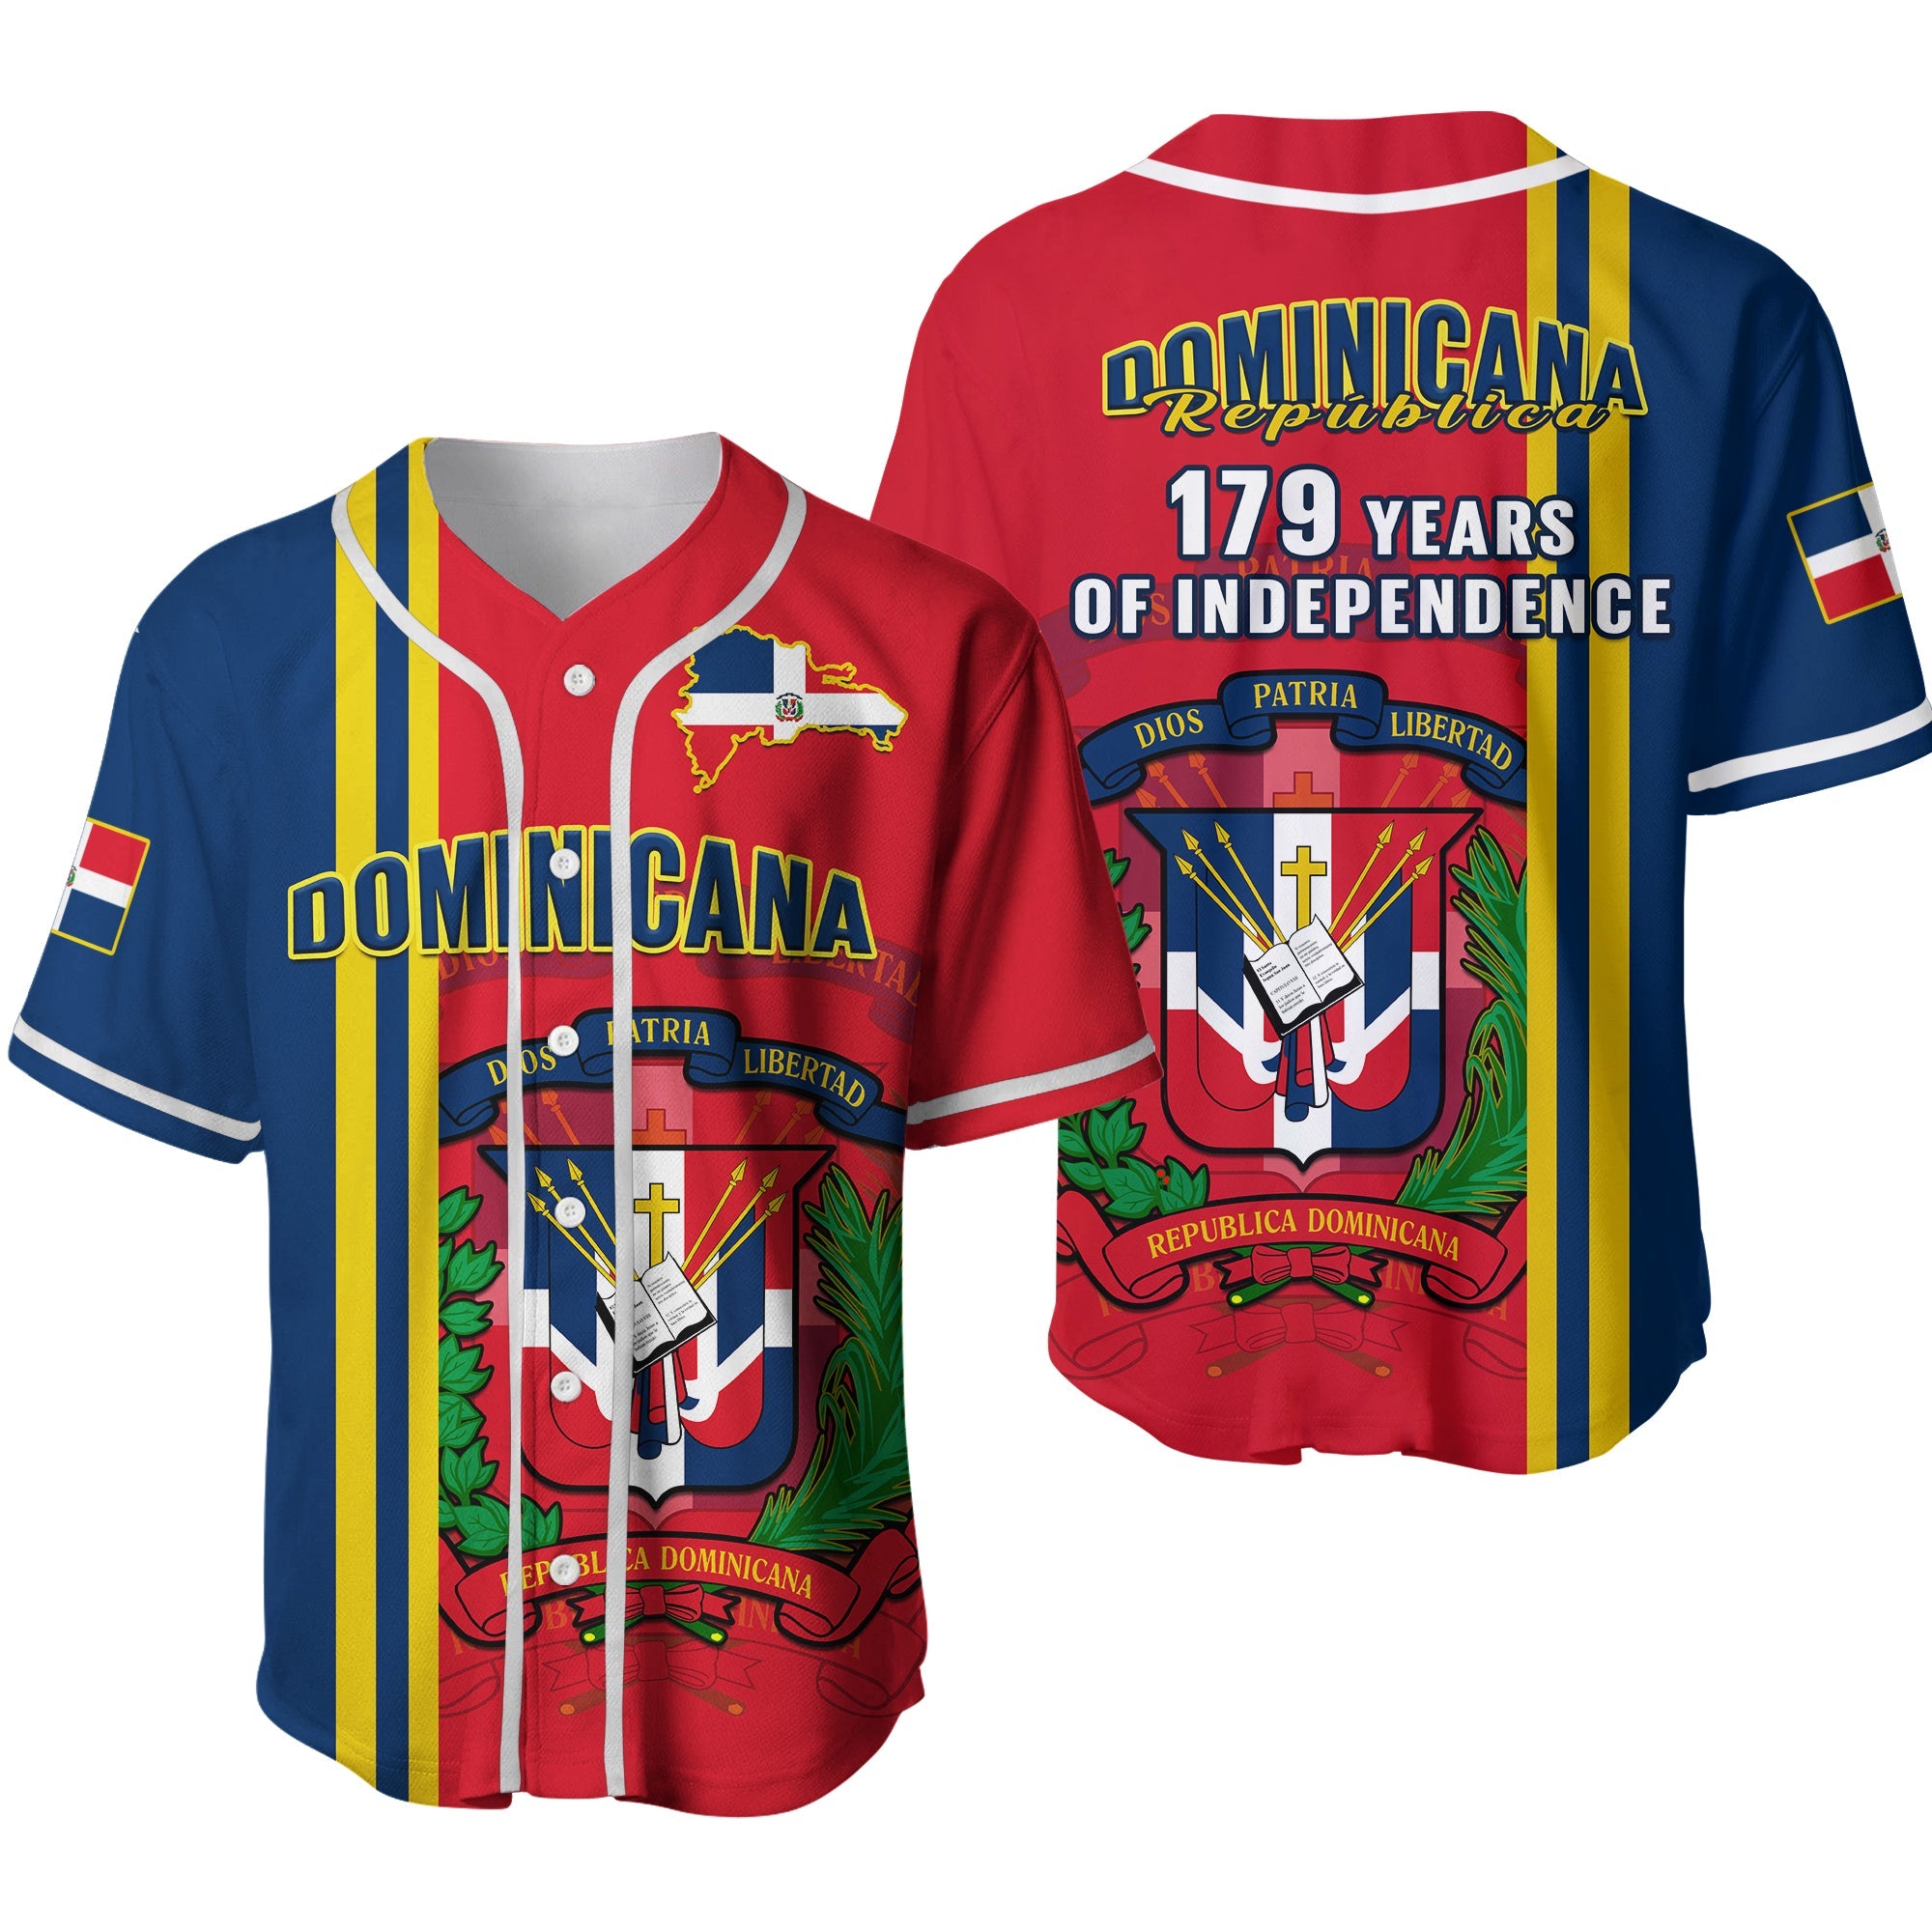 dominican-republic-baseball-jersey-happy-179-years-of-independence-ver02